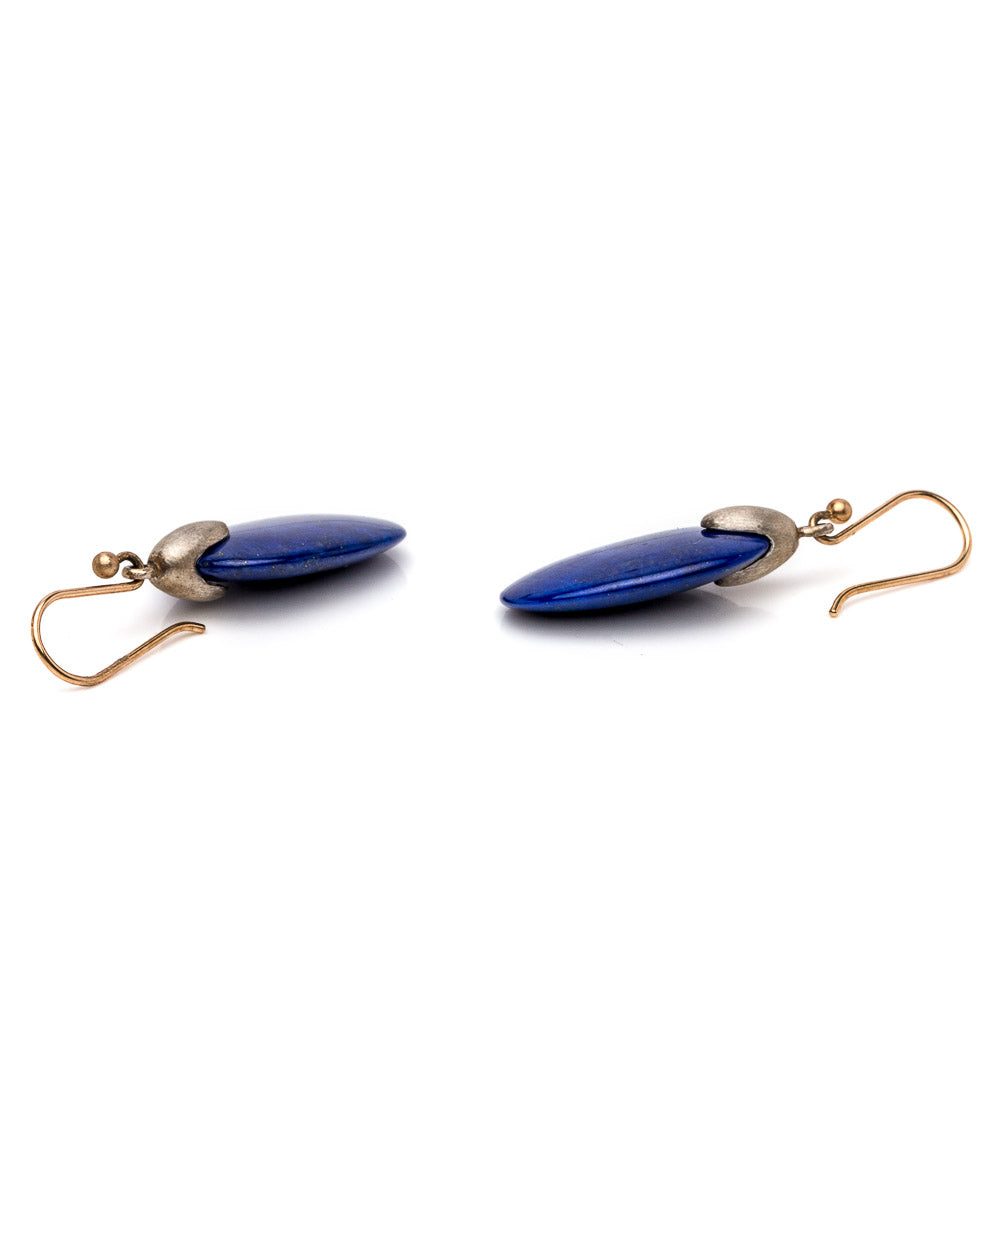 Silver Top Lapis Small Chip Earrings